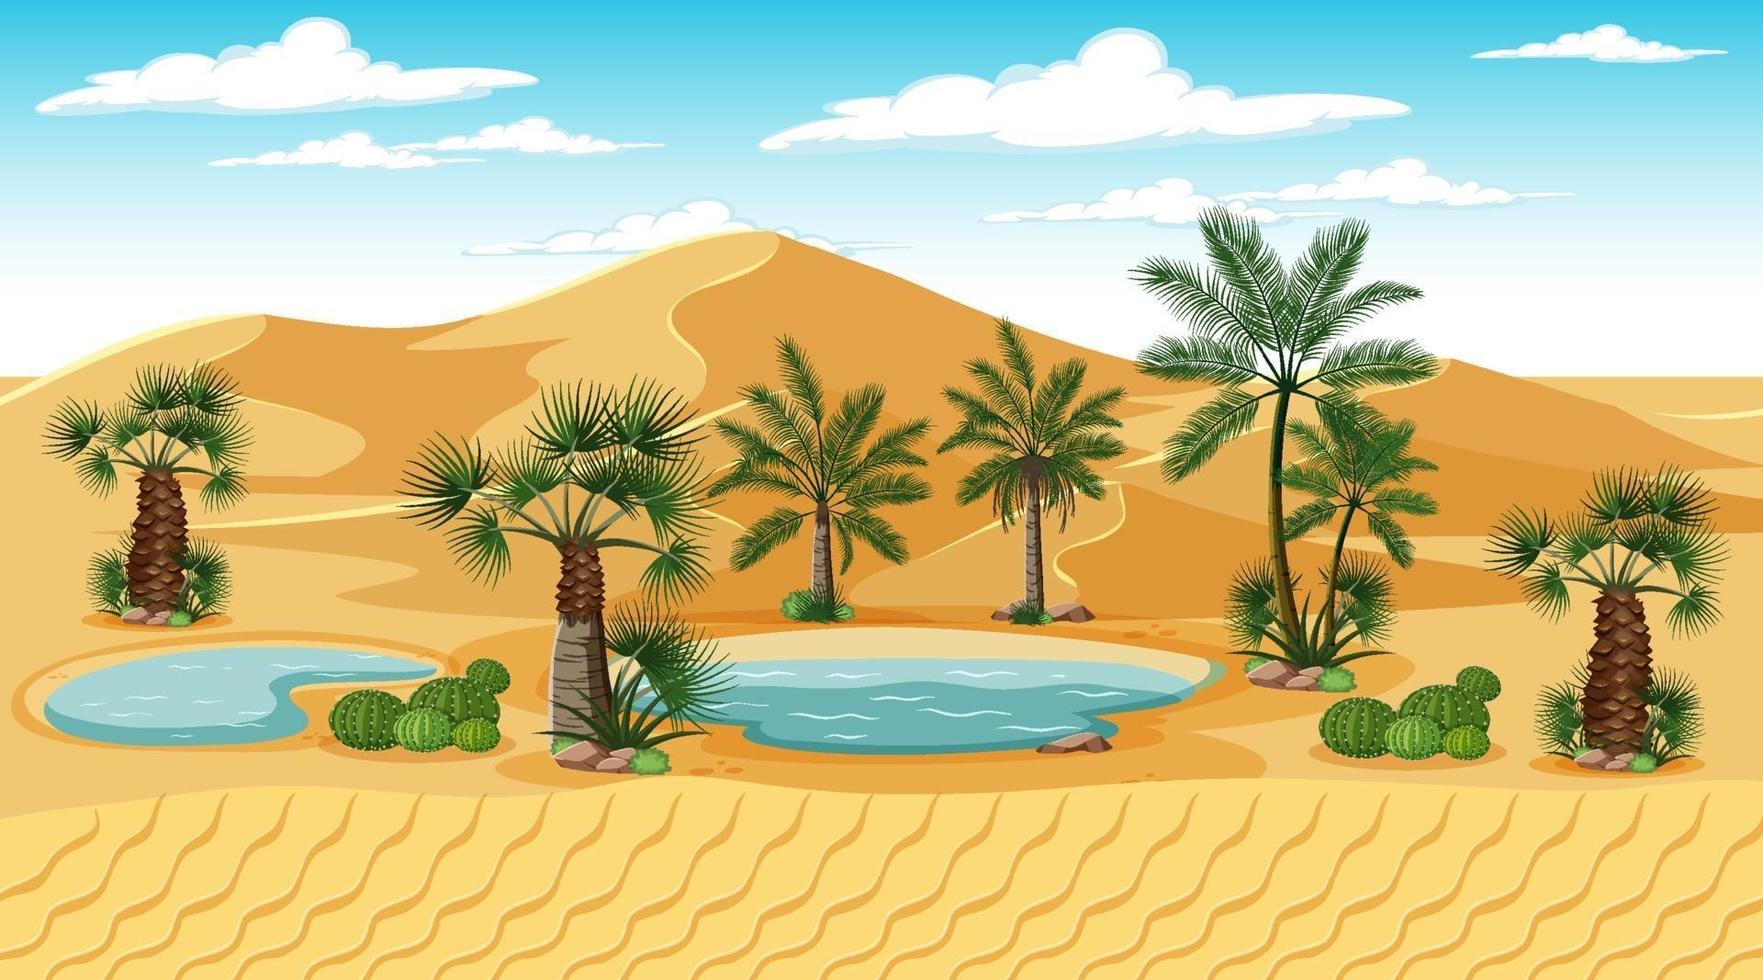 Desert forest landscape at day time scene with oasis vector